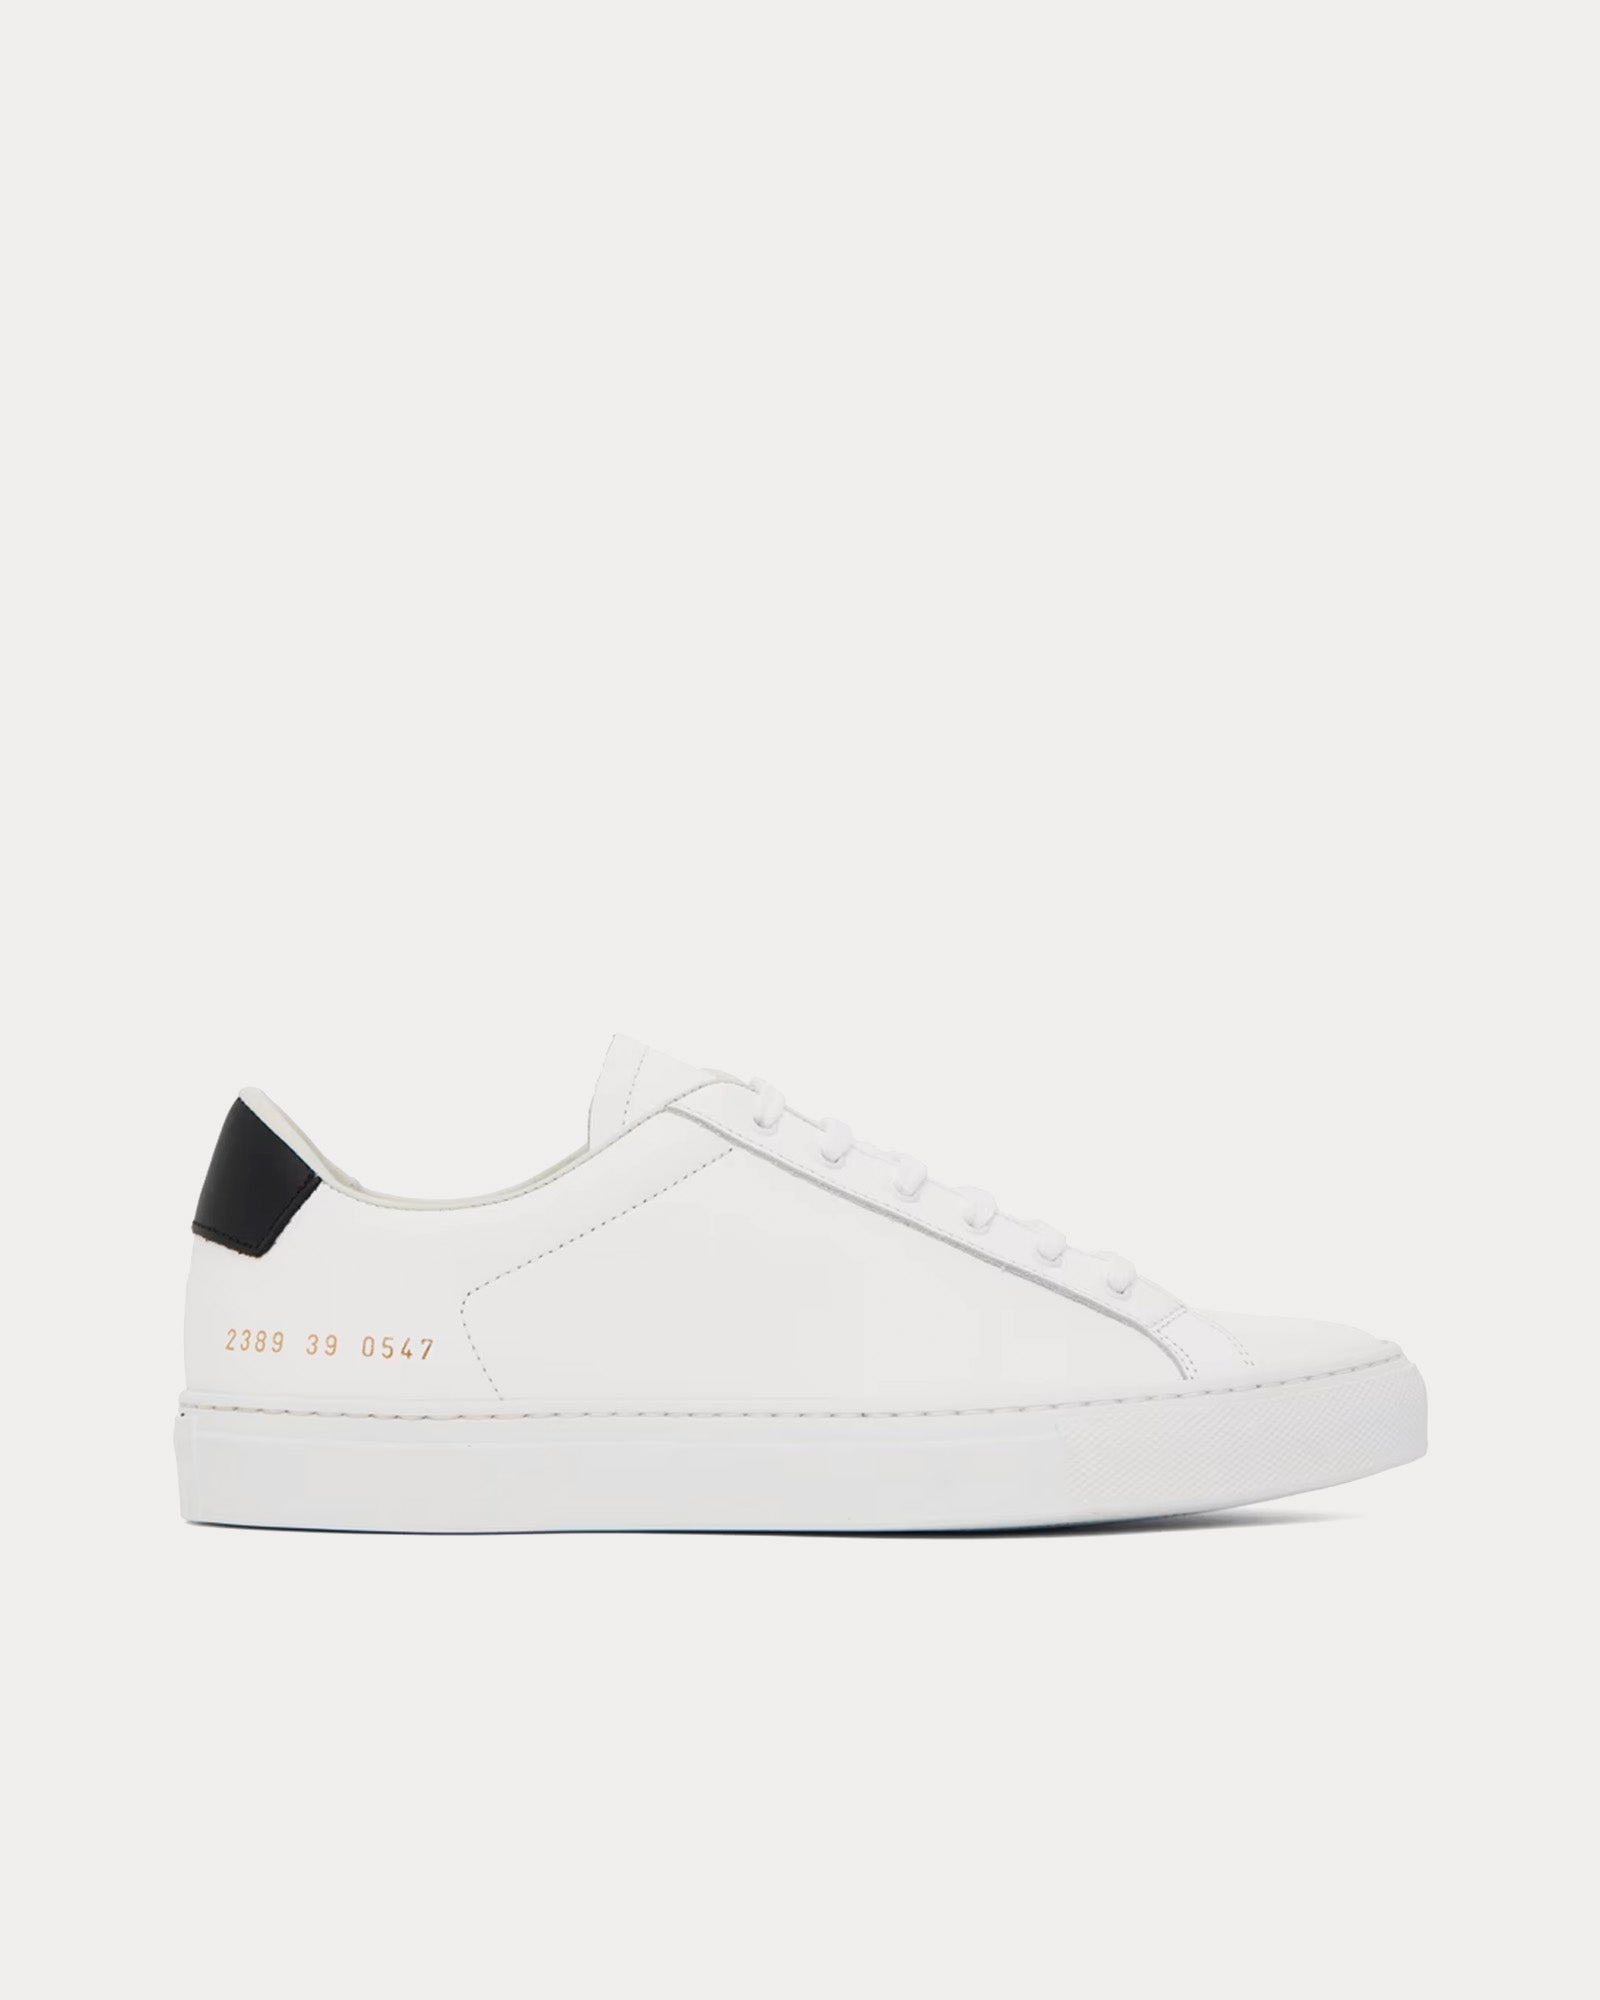 Common Projects - Retro Leather White / Black Low Top Sneakers